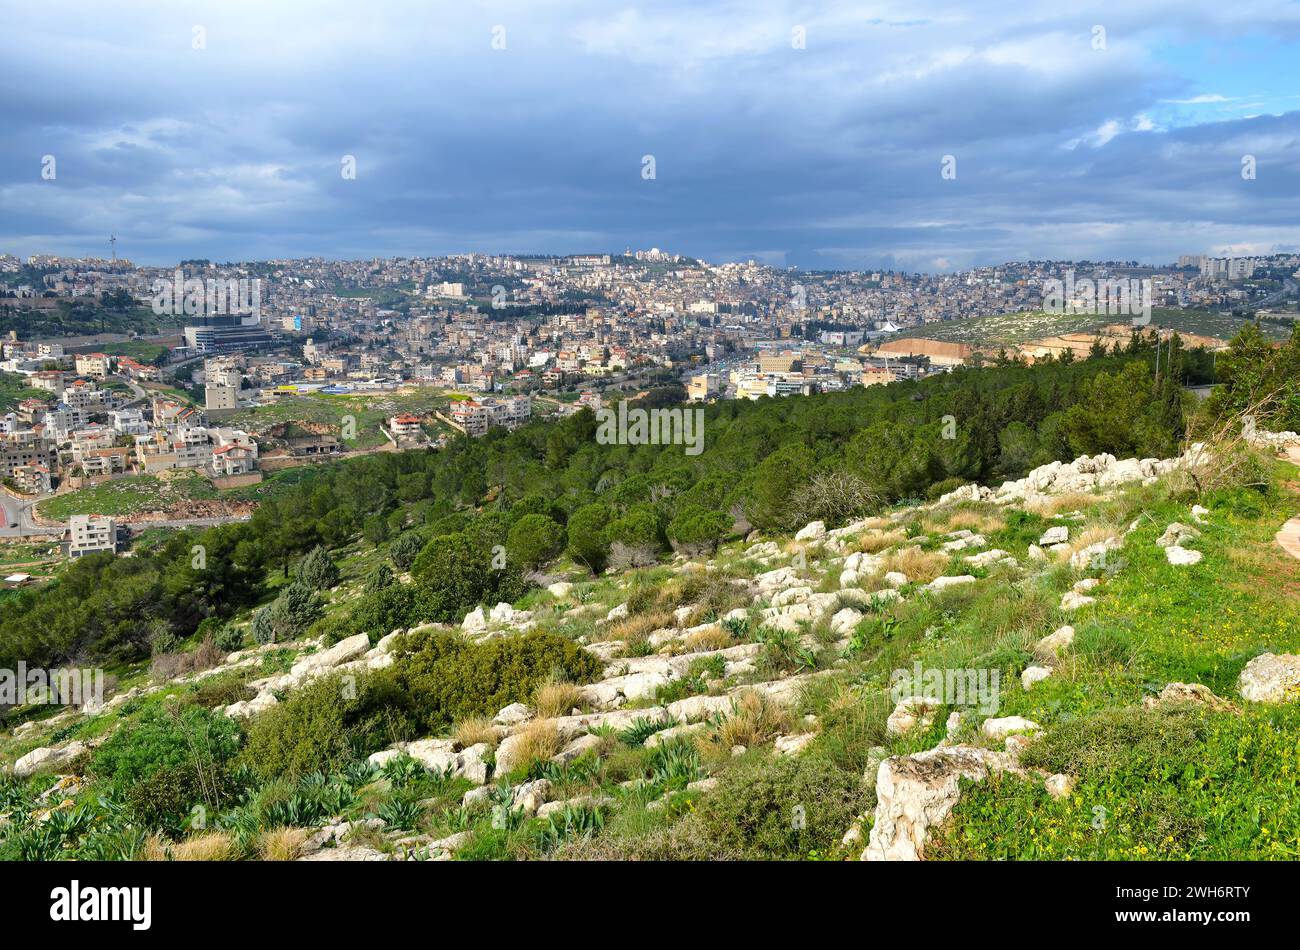 An areal View of Nazareth from Mount Precipice (Har Kedumim) , Israel Stock Photo